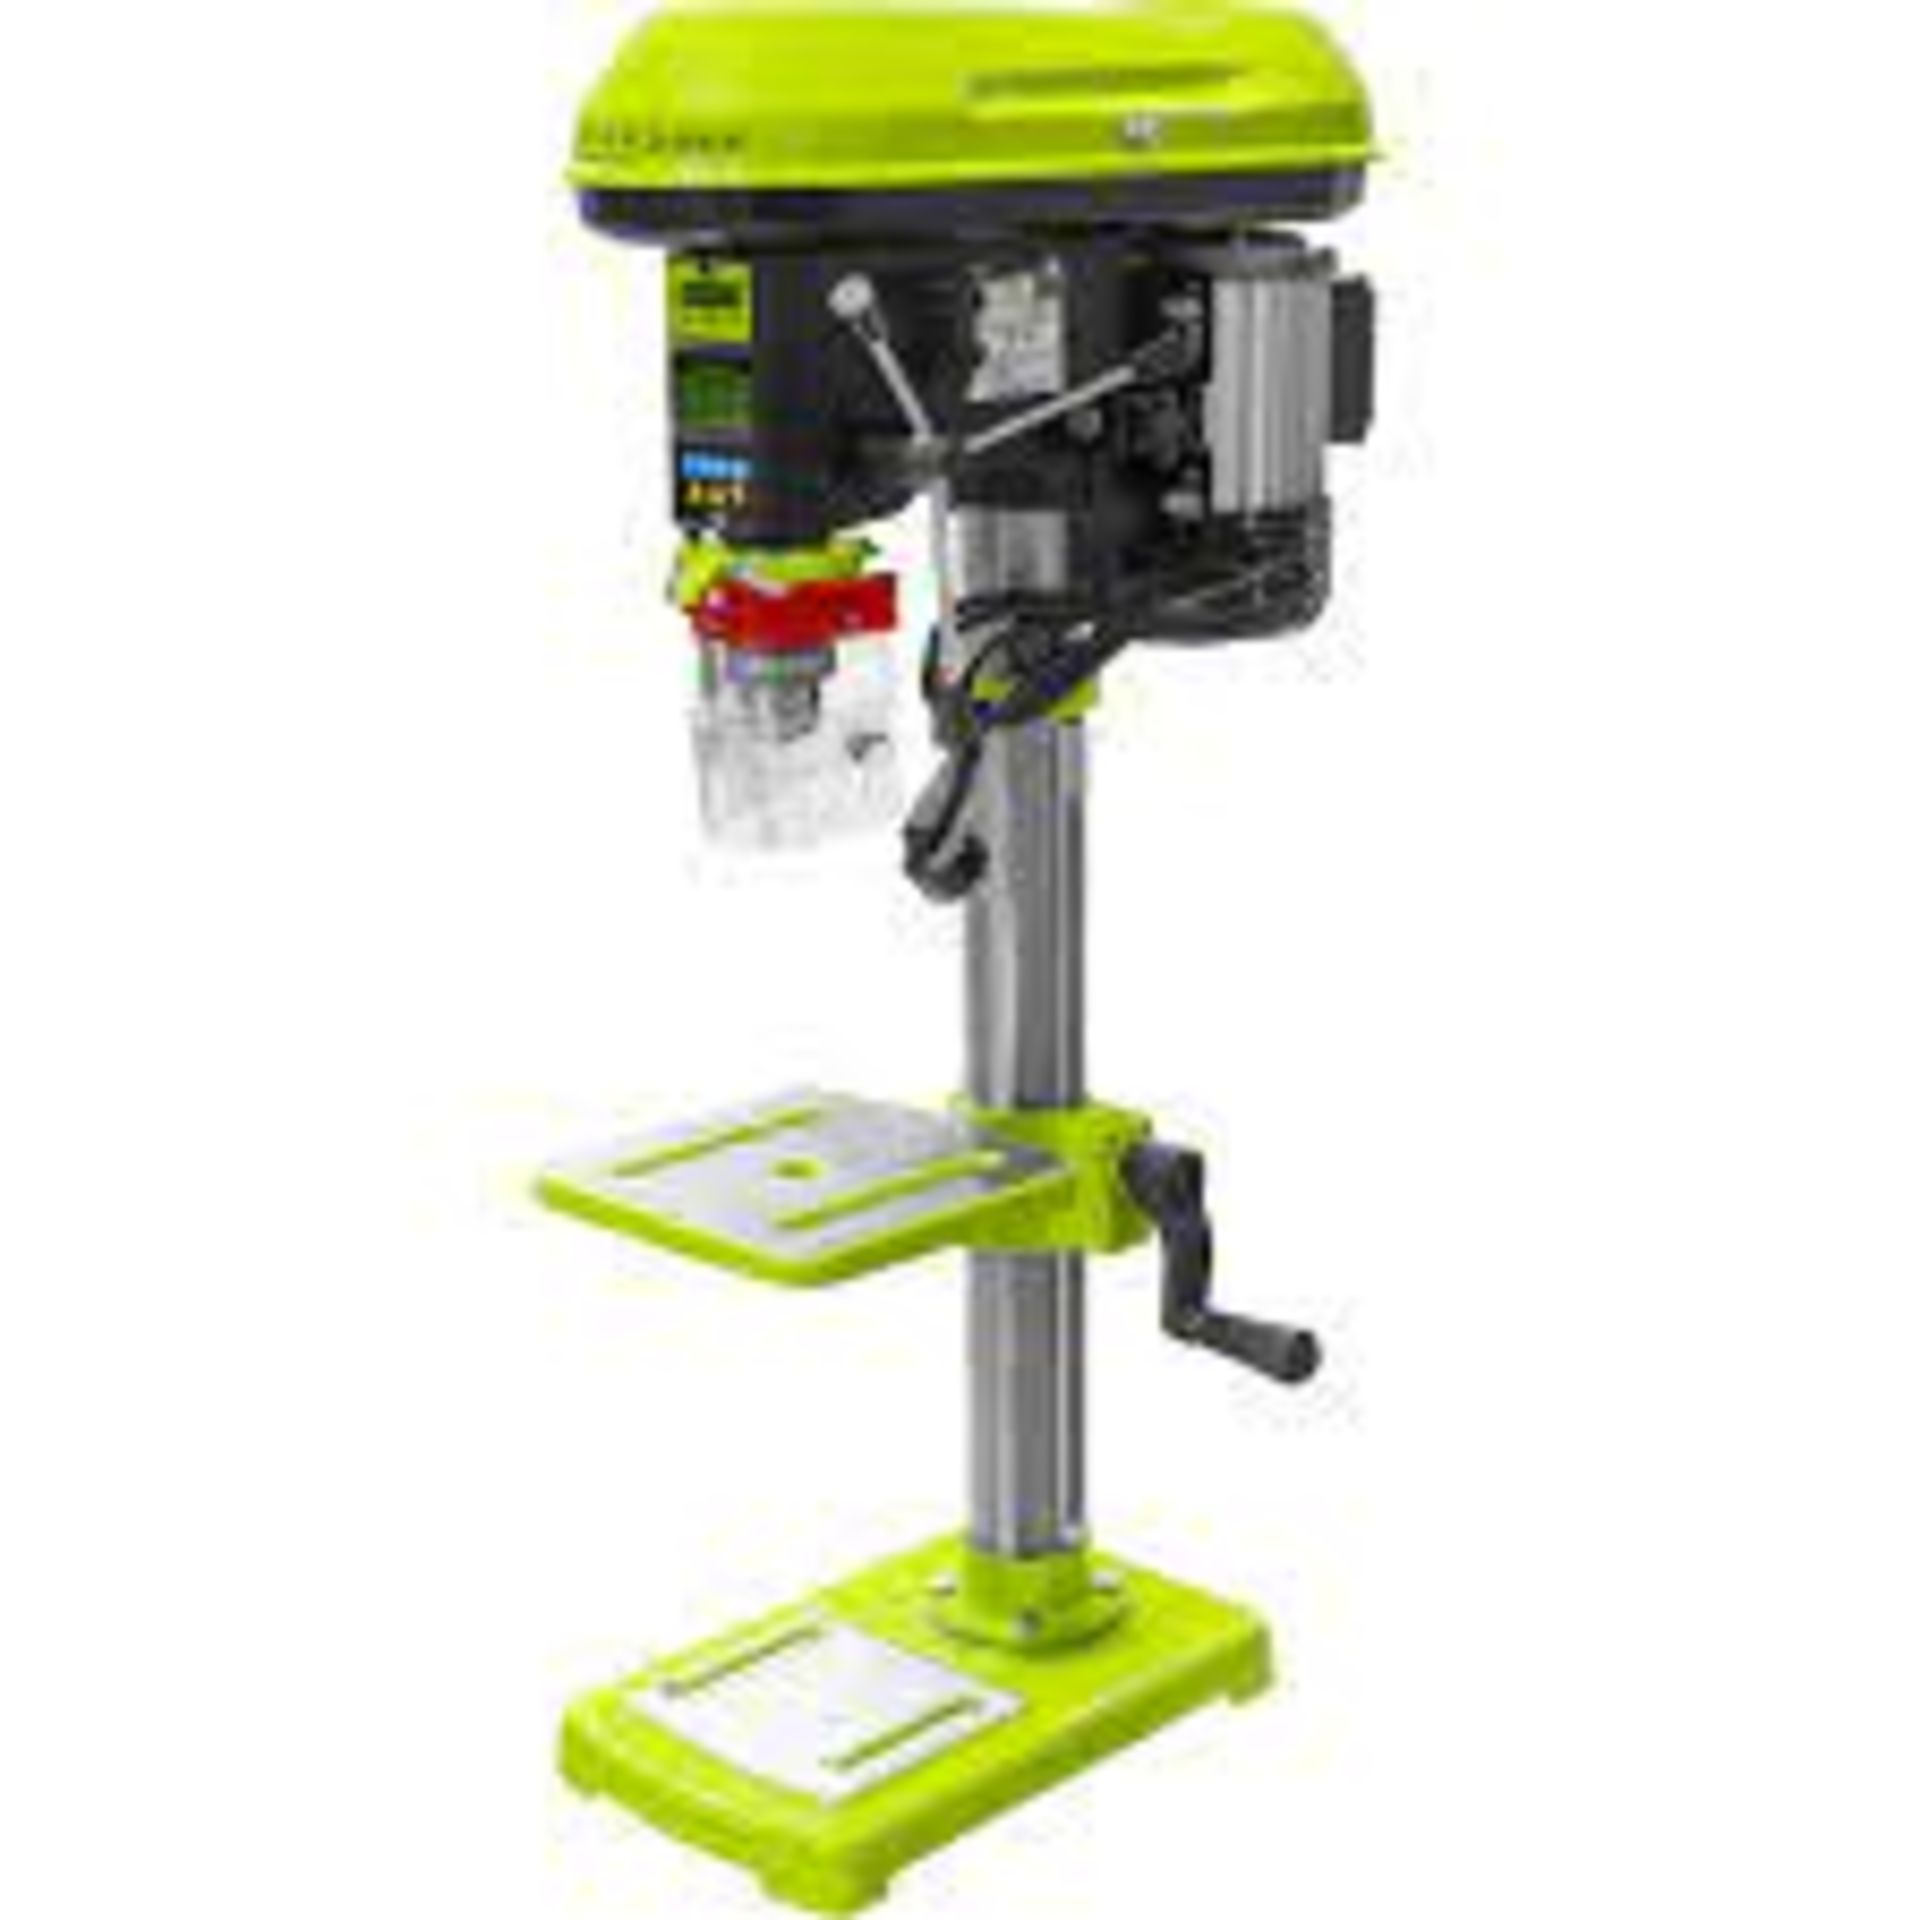 Zipper STB16T 630W 16mm Bench Drill Press 12 Speed. RRP £249. Ideal for small homes or garage